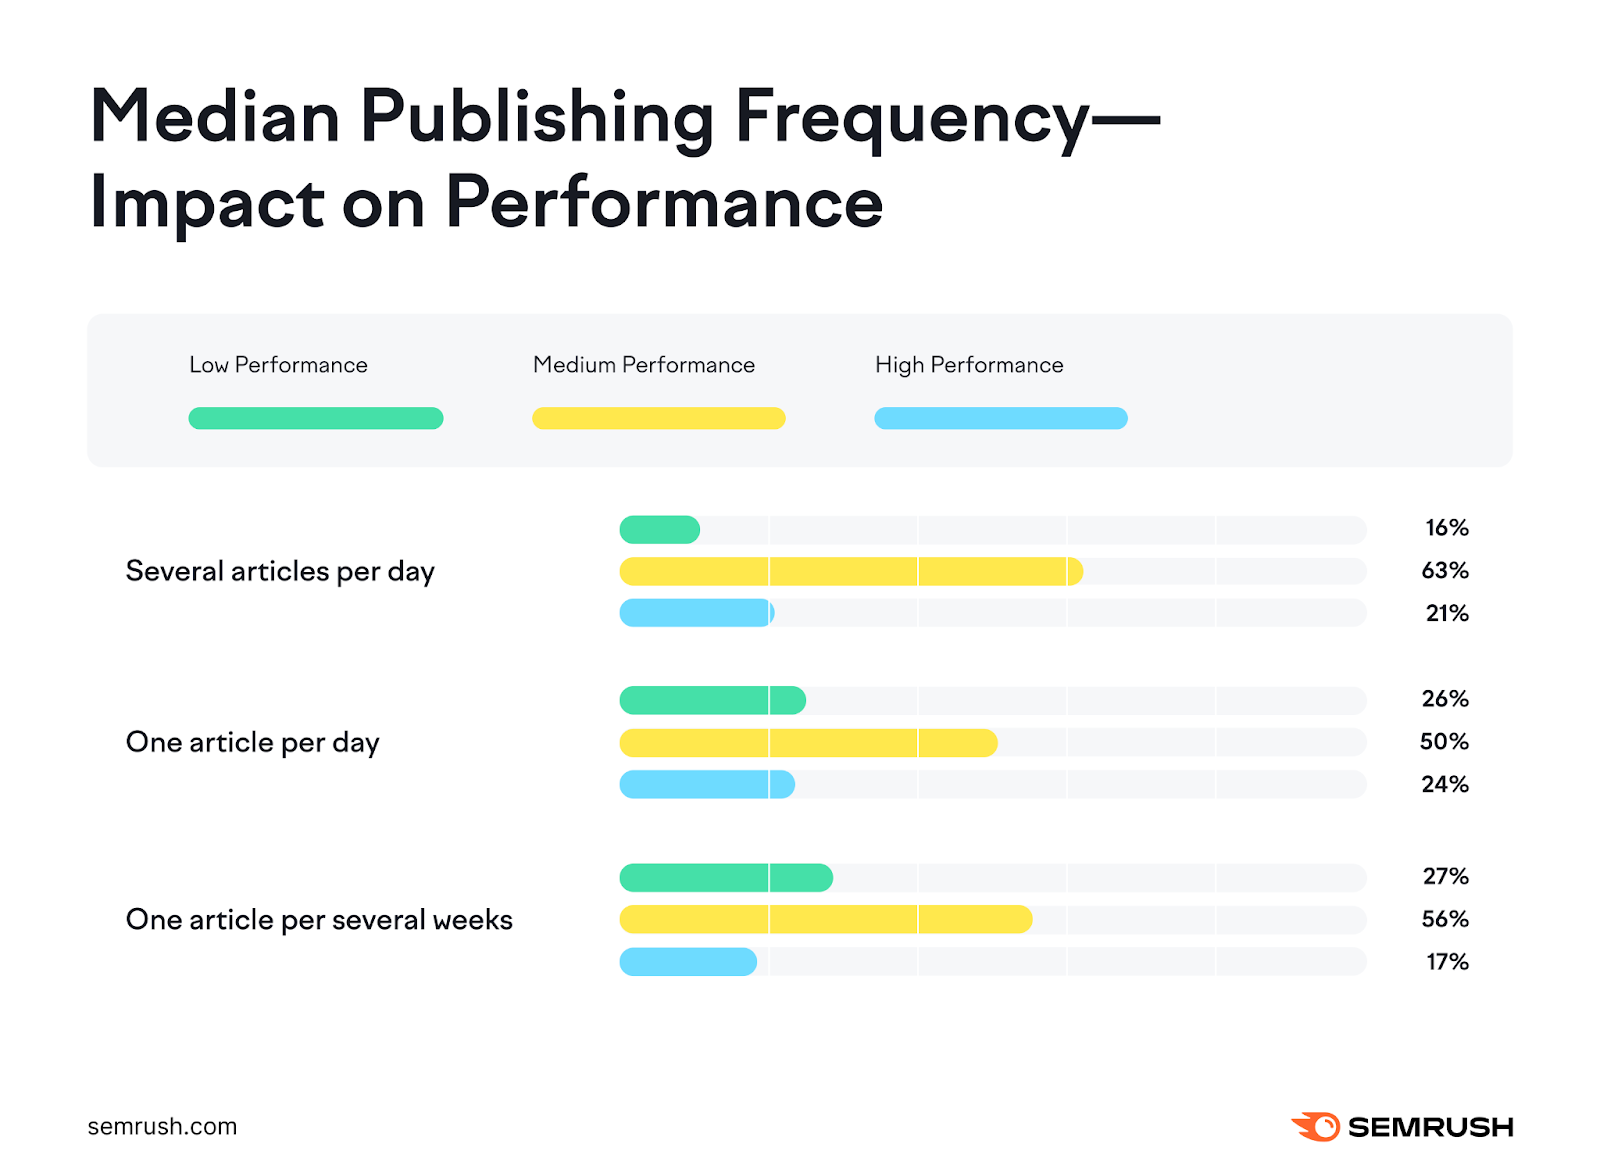 A graph showing median publishing frequency - impact on performance